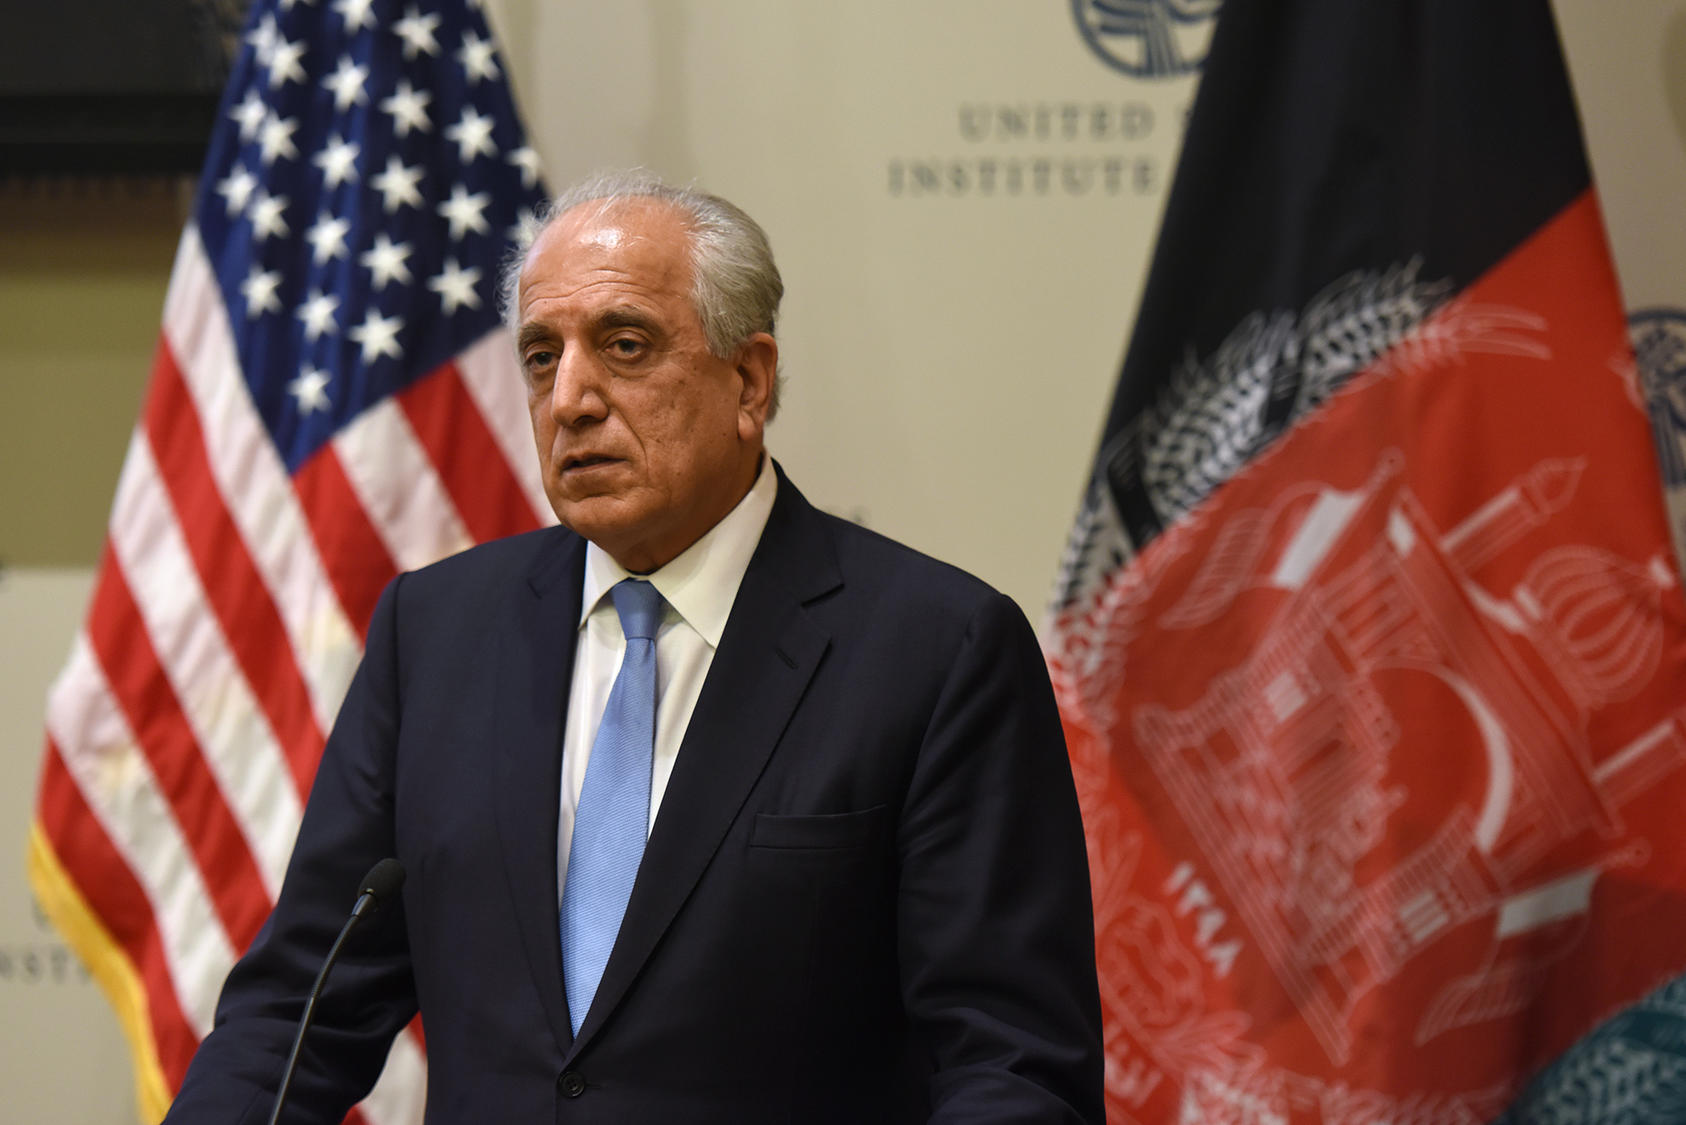 Ghani and Abdullah open to negotiations to end the political crisis: Khalilzad